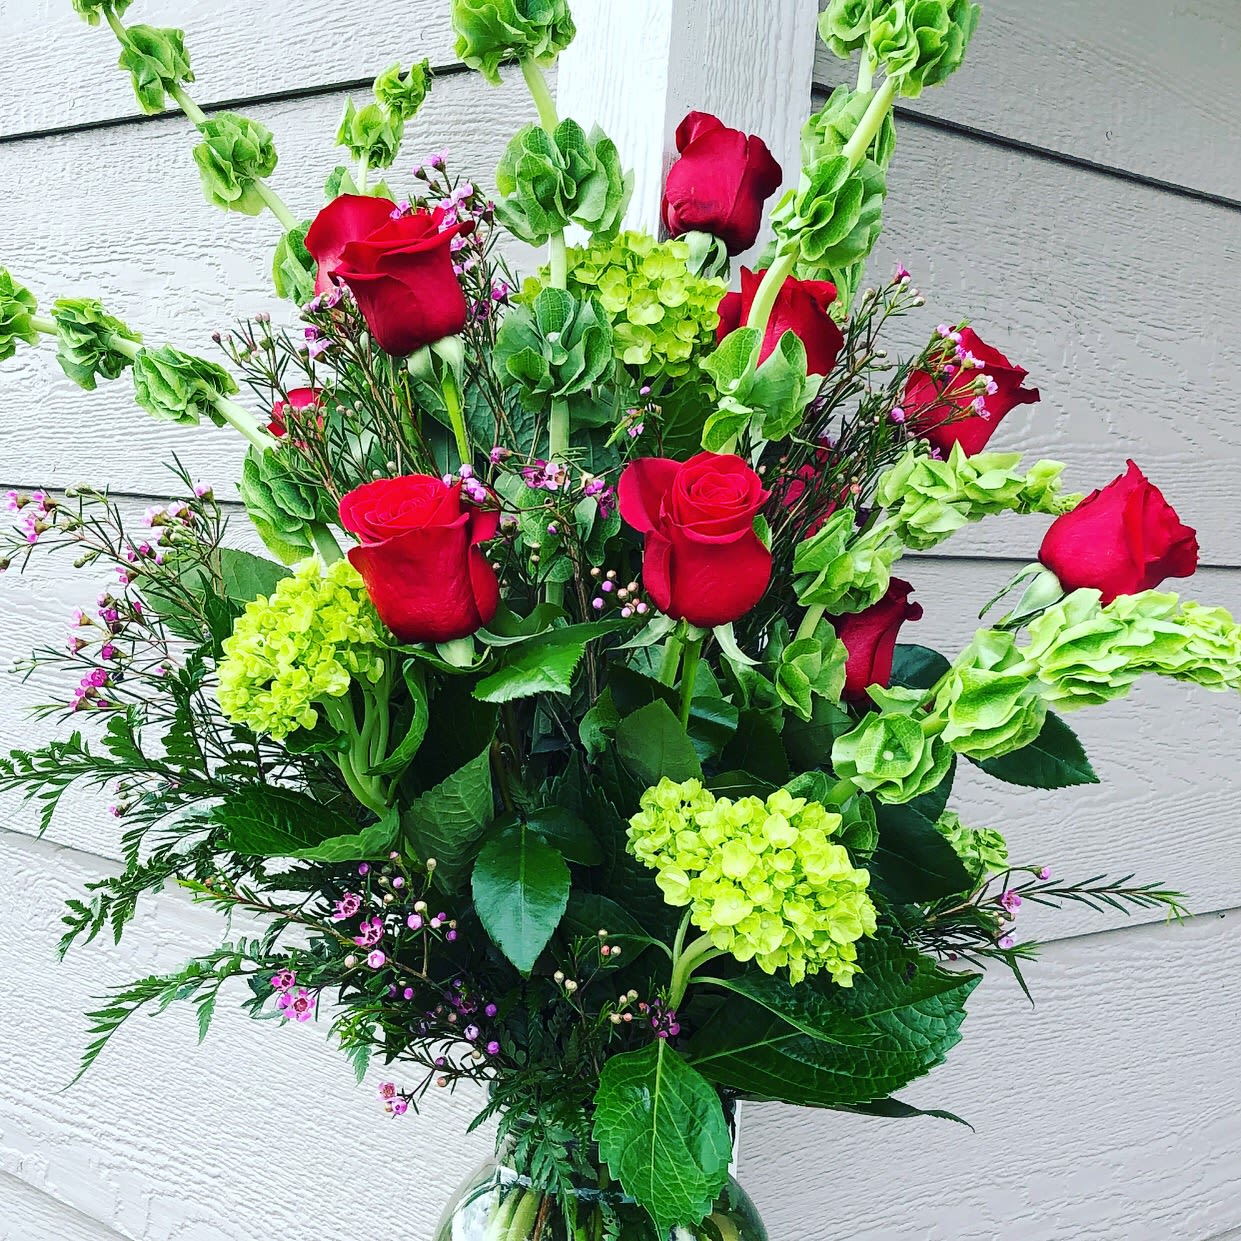 The Bells of Ireland  - Red roses, mini green hydrangea and bells of Ireland 